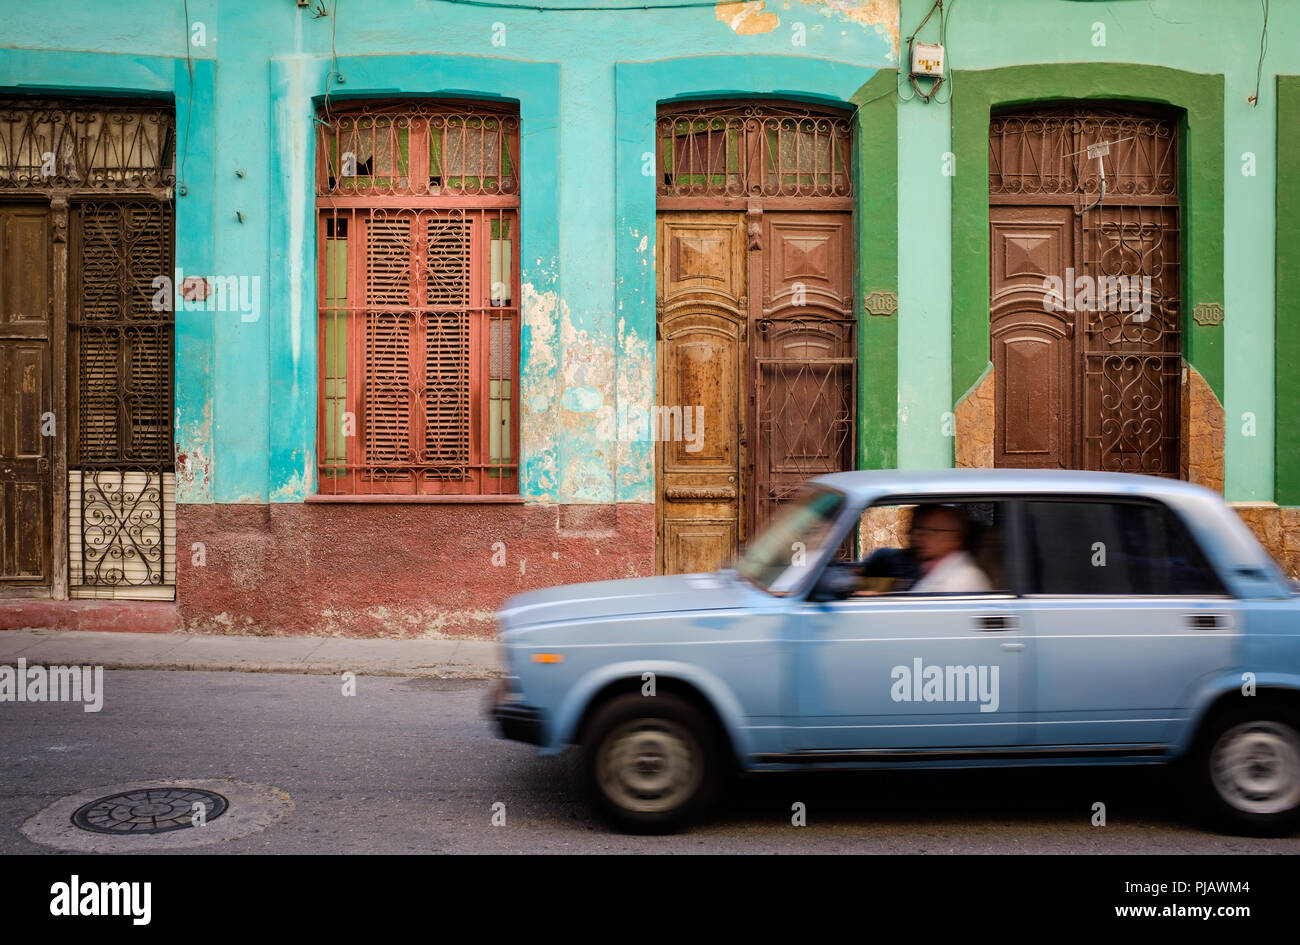 HAVANA, CUBA - CIRCA MARCH 2017: Old car drives in the streets of Havana, passing by a colorful home. Stock Photo